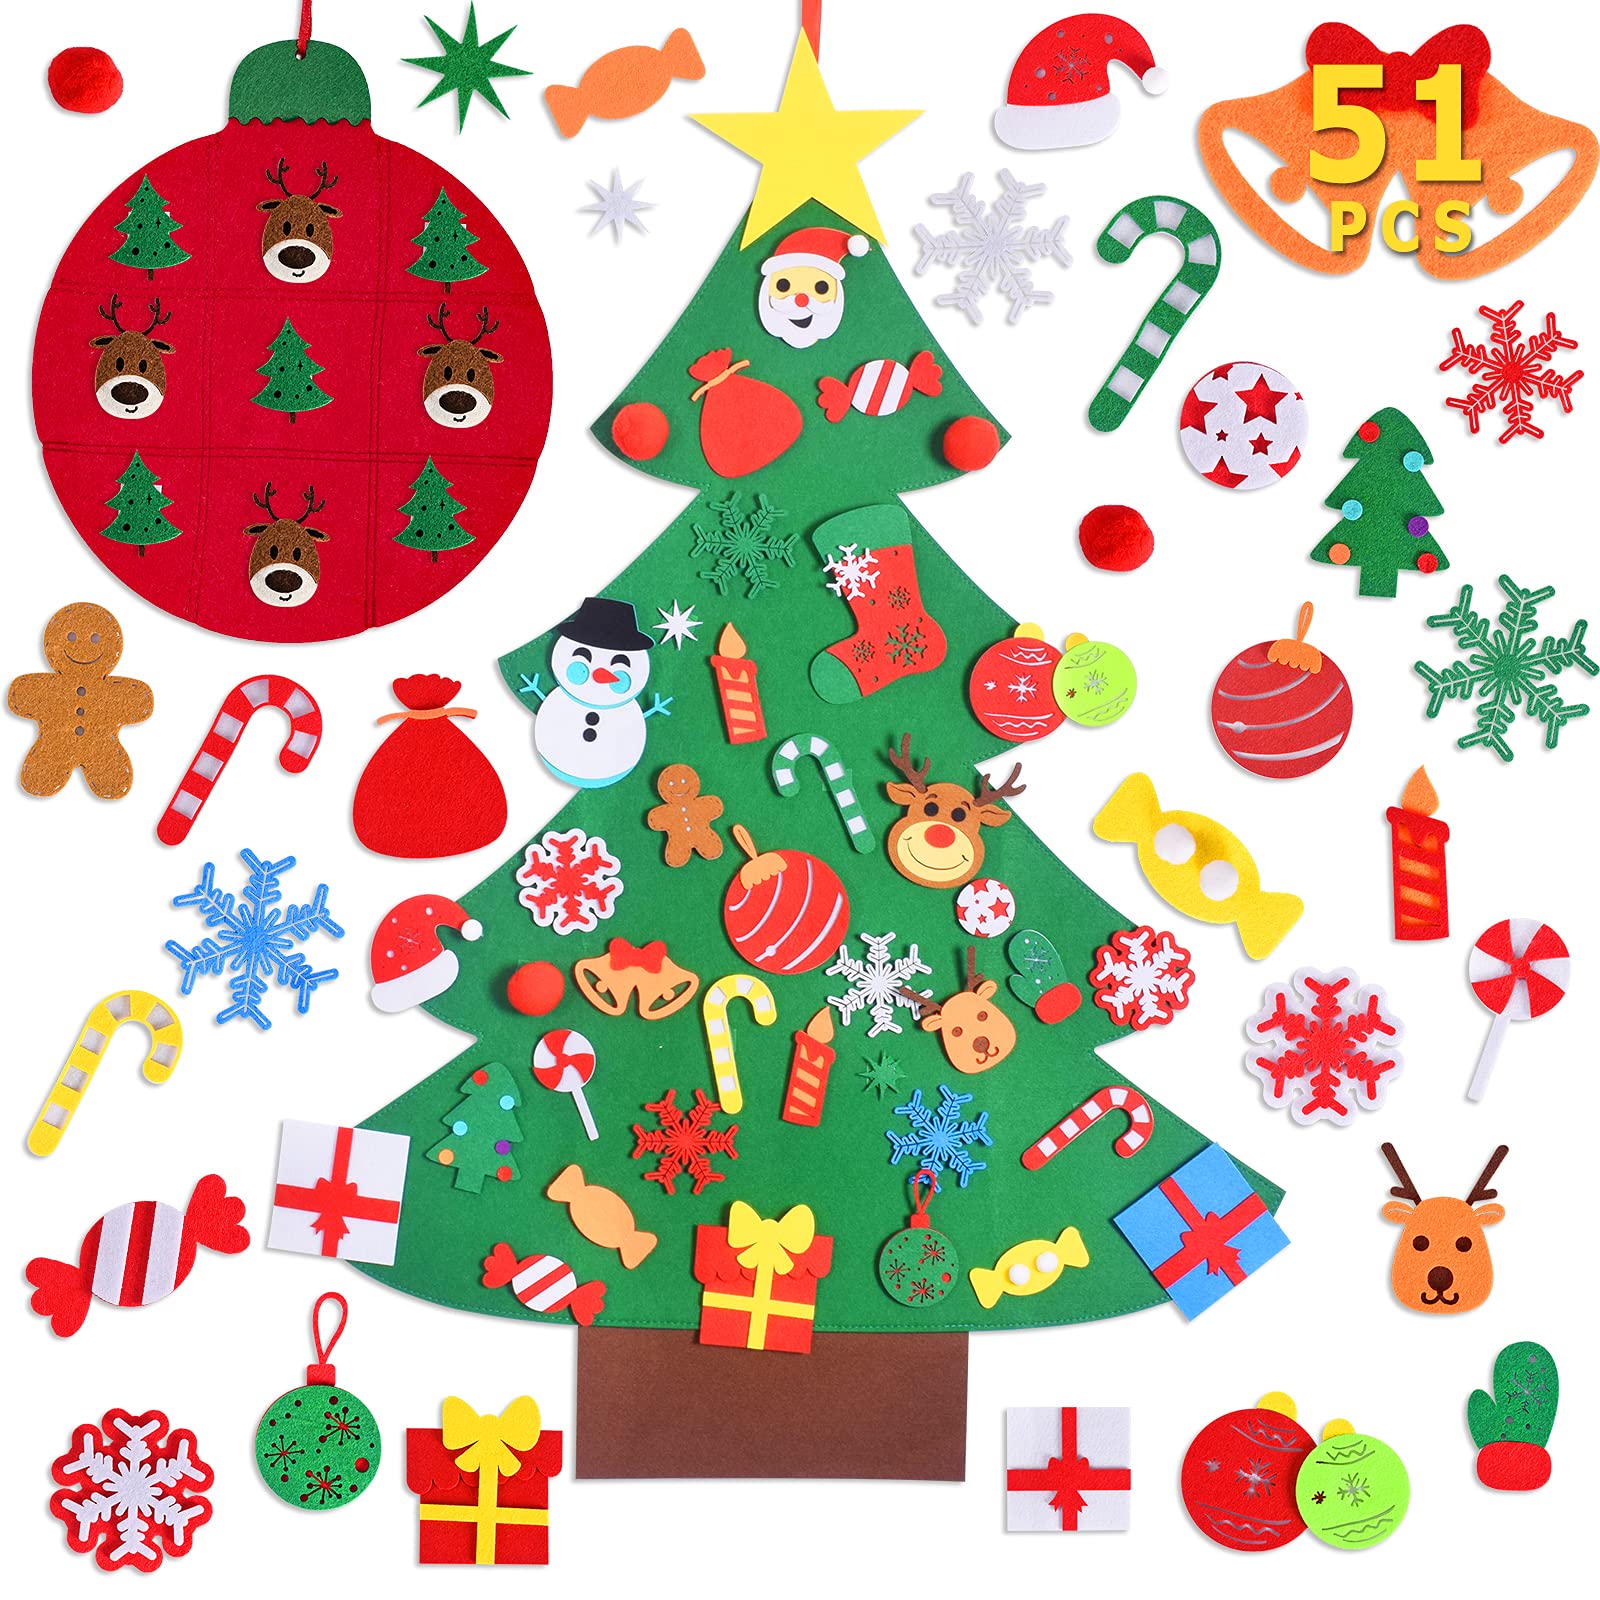 Max Fun DIY Felt Christmas Tree Set with 40Pcs Ornaments Wall Hanging Decorations Plus Tic-Tac-Toe Game Children's Felt Craft Kits for Kids Xmas Gifts Party Favors